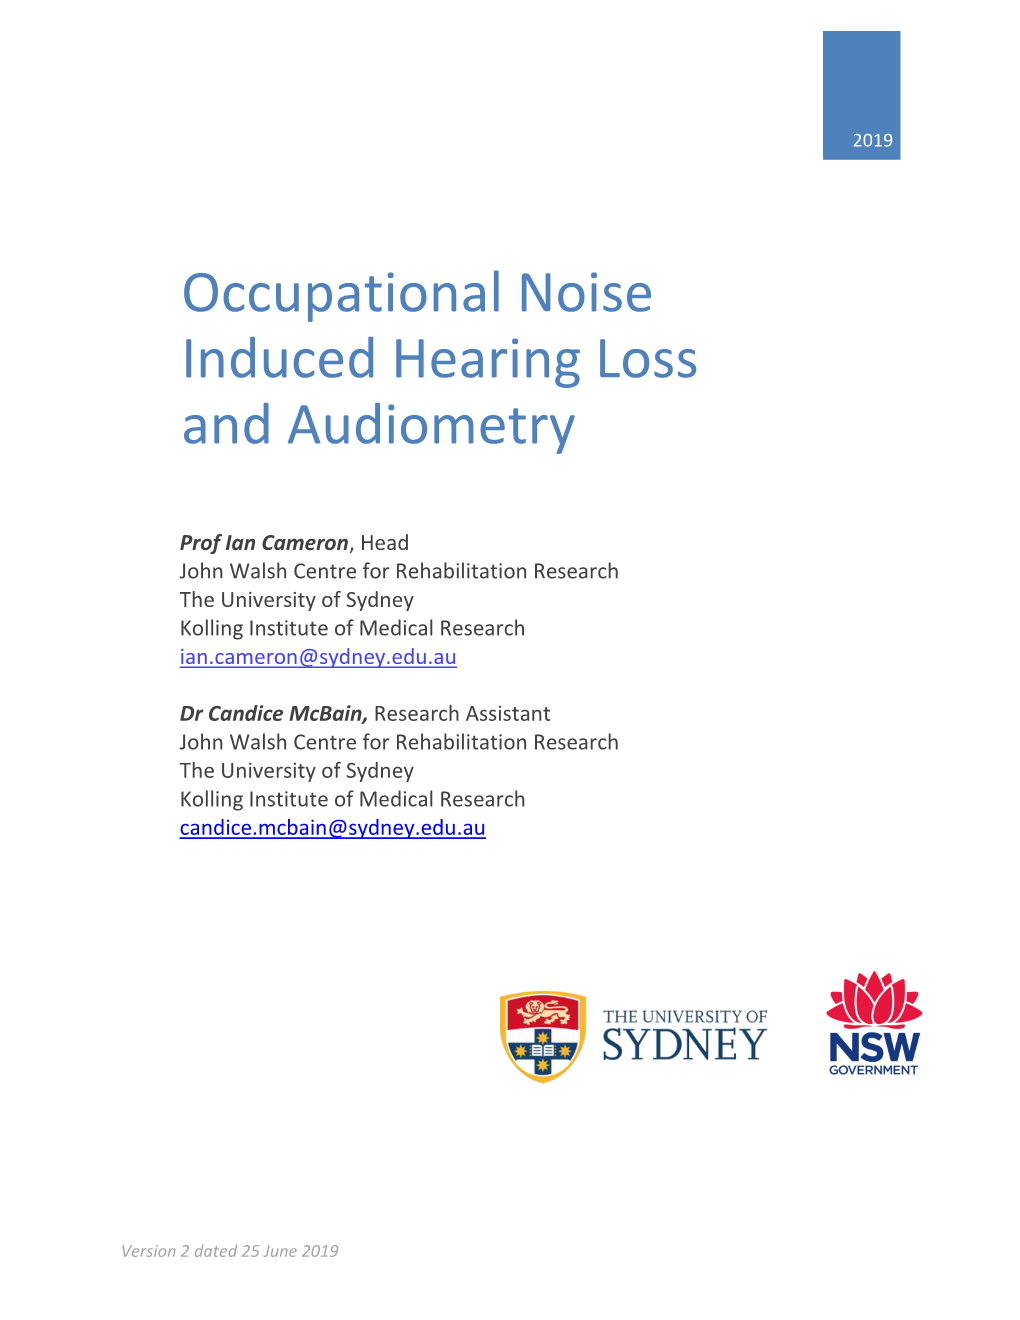 Occupational Noise Induced Hearing Loss and Audiometry